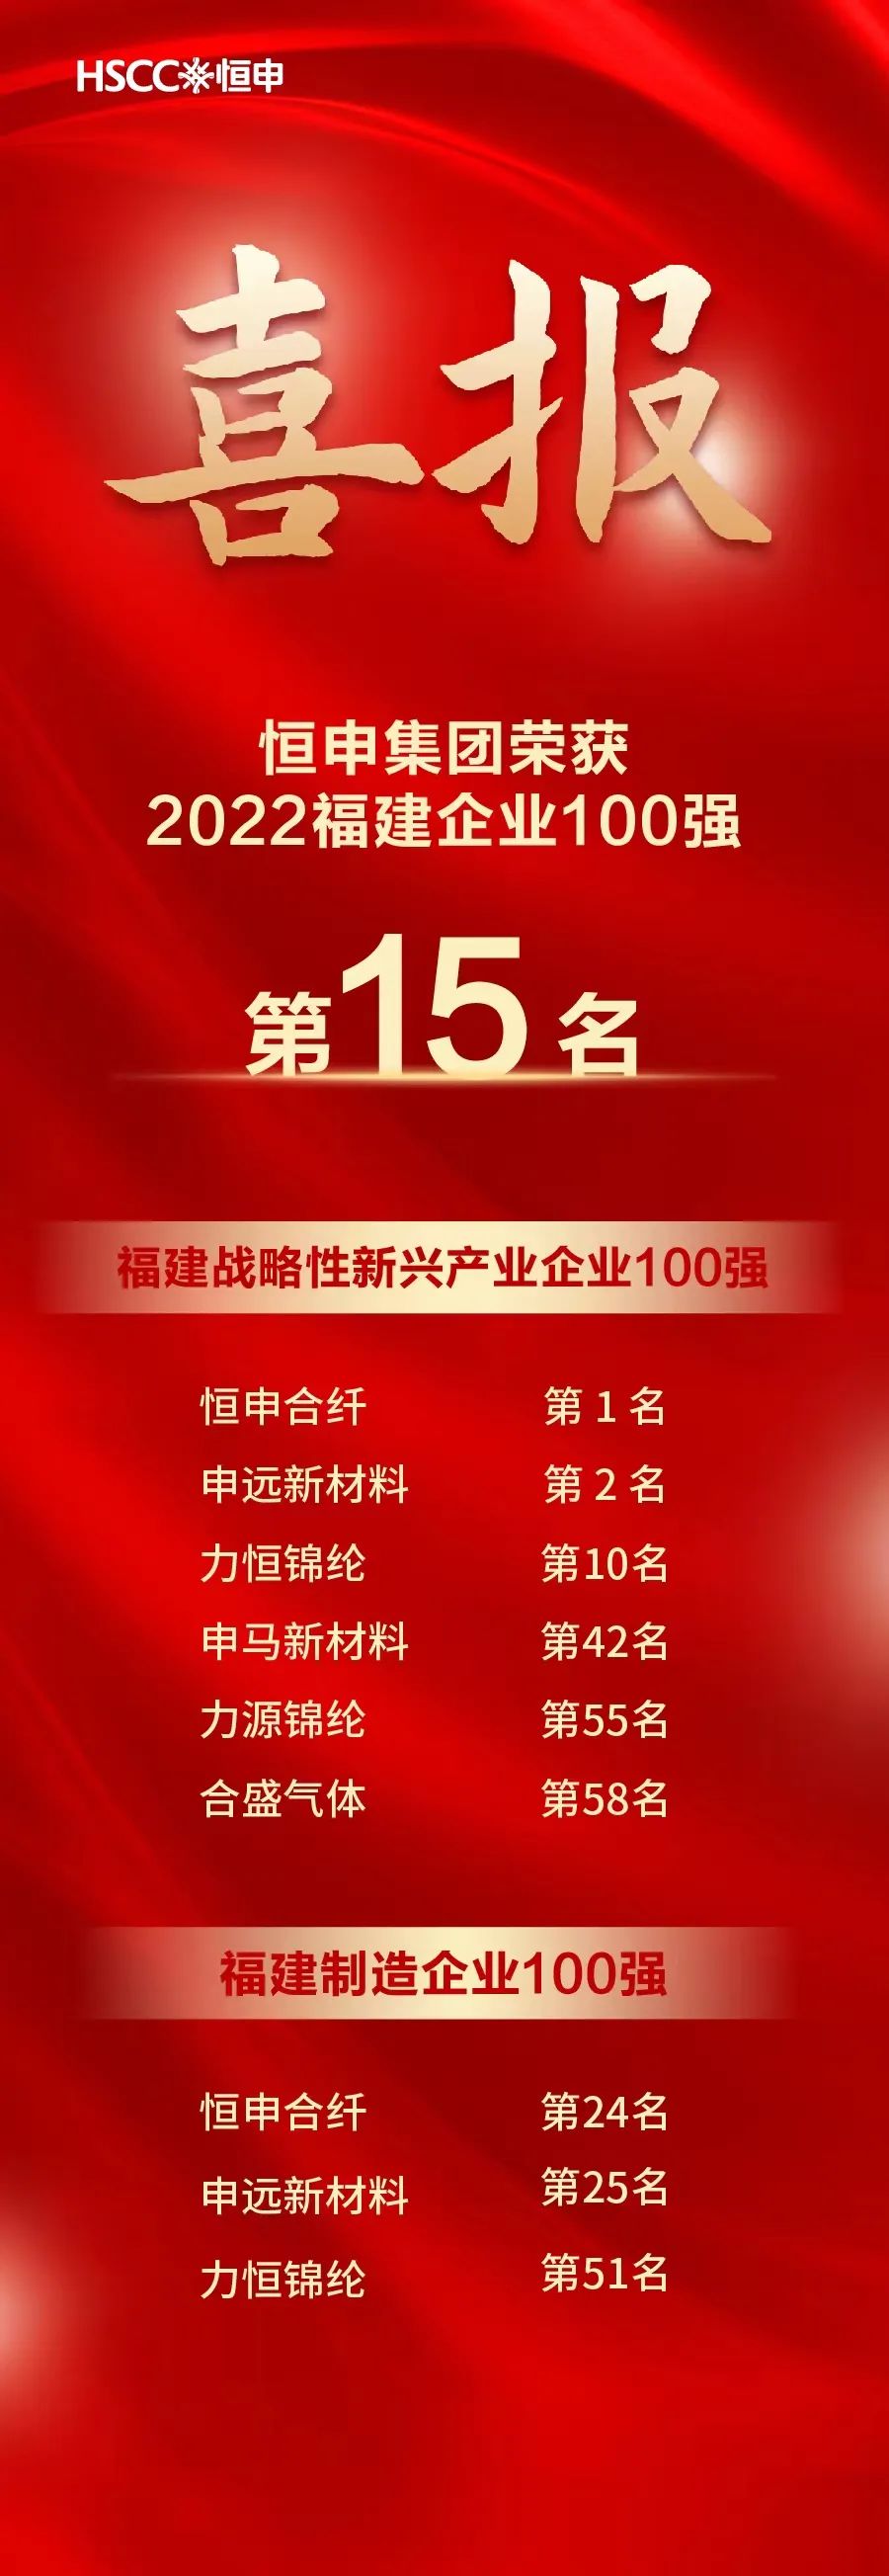 Highsun Group was Awarded the 15th Place of Top 100 Fujian Enterprises in 2022, And Many Of Its Subsidiaries Have Achieved Good Results